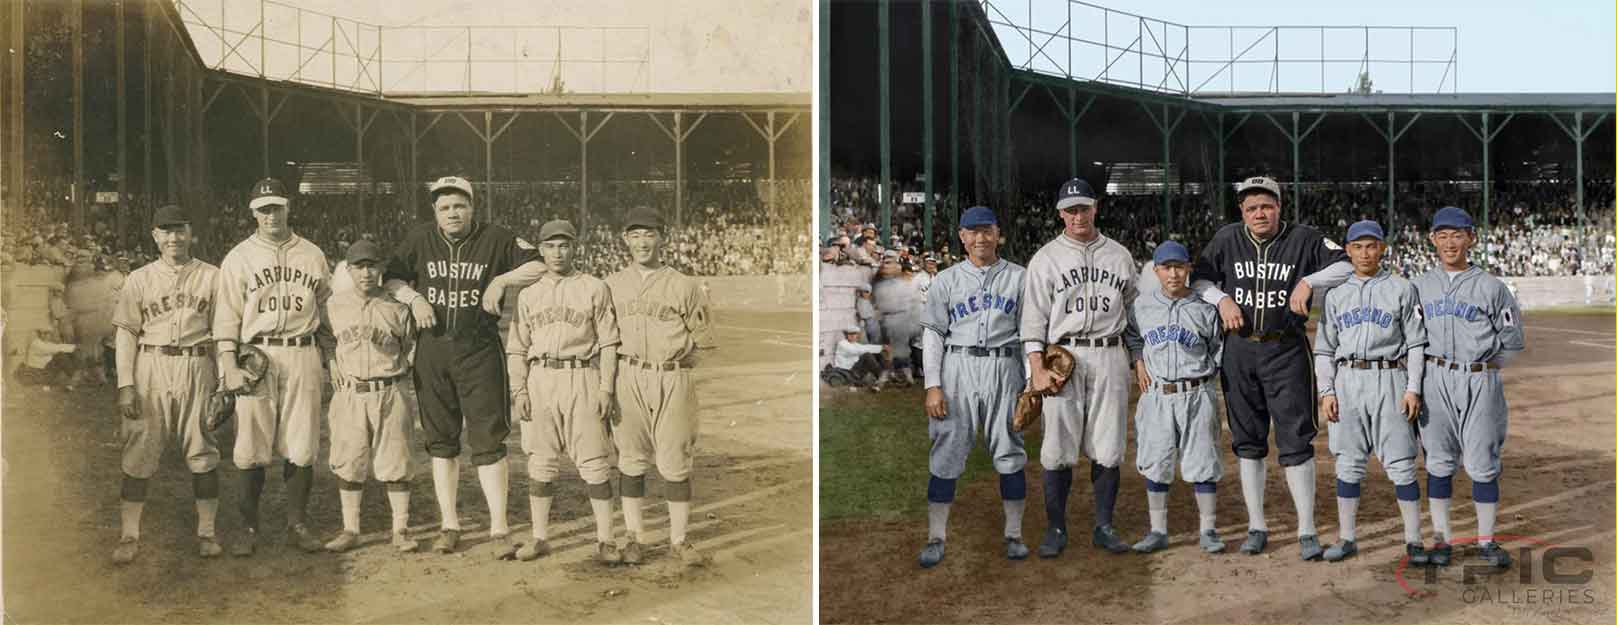 Lou Gehrig and Babe Ruth with Japanese-American Baseball Players, Fresno, CA 1927